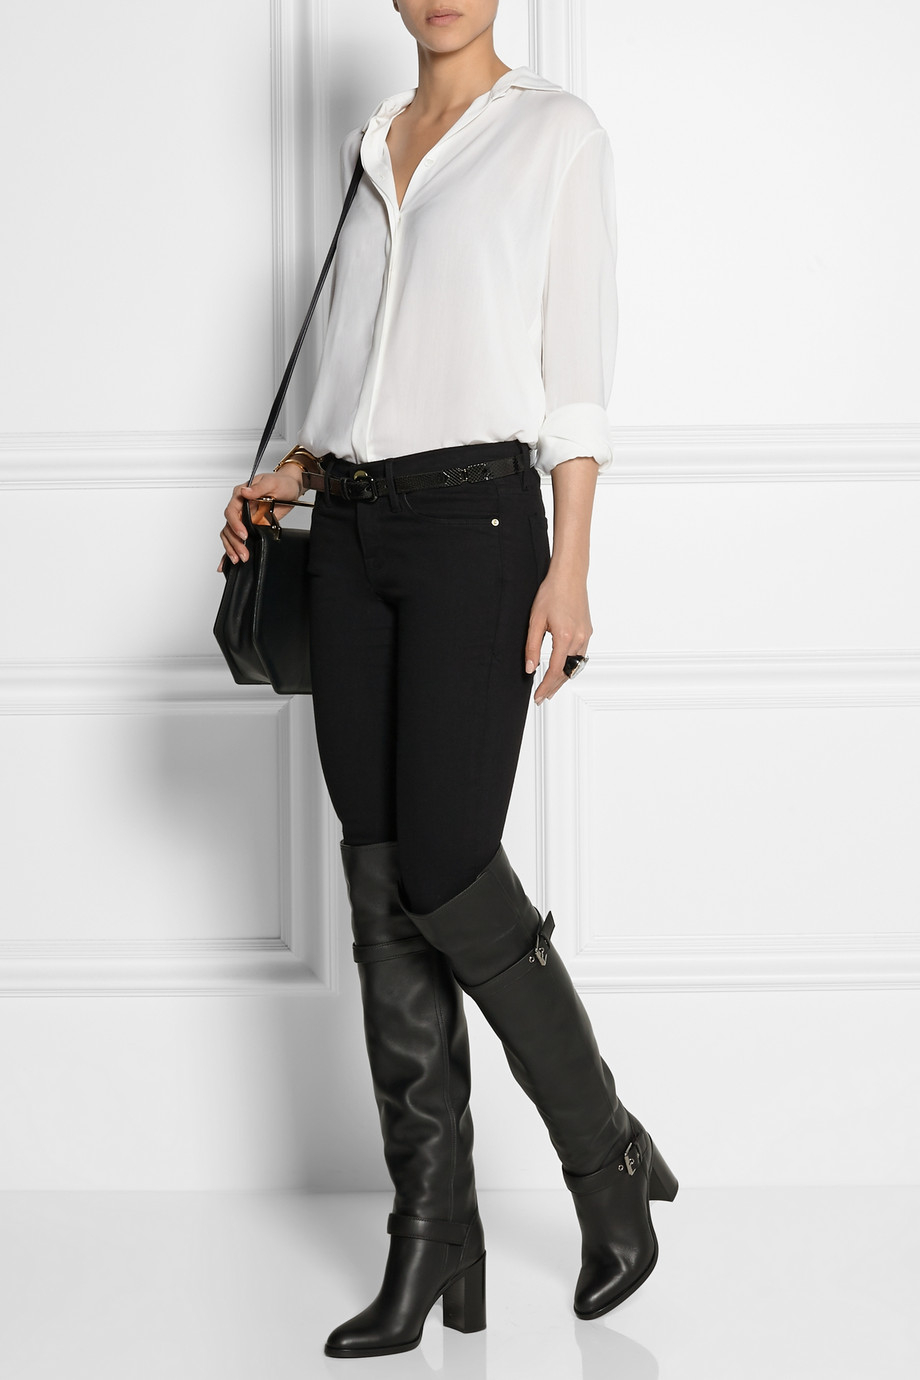 Gianvito Rossi Leather Over-The-Knee Boots in Black | Lyst Canada